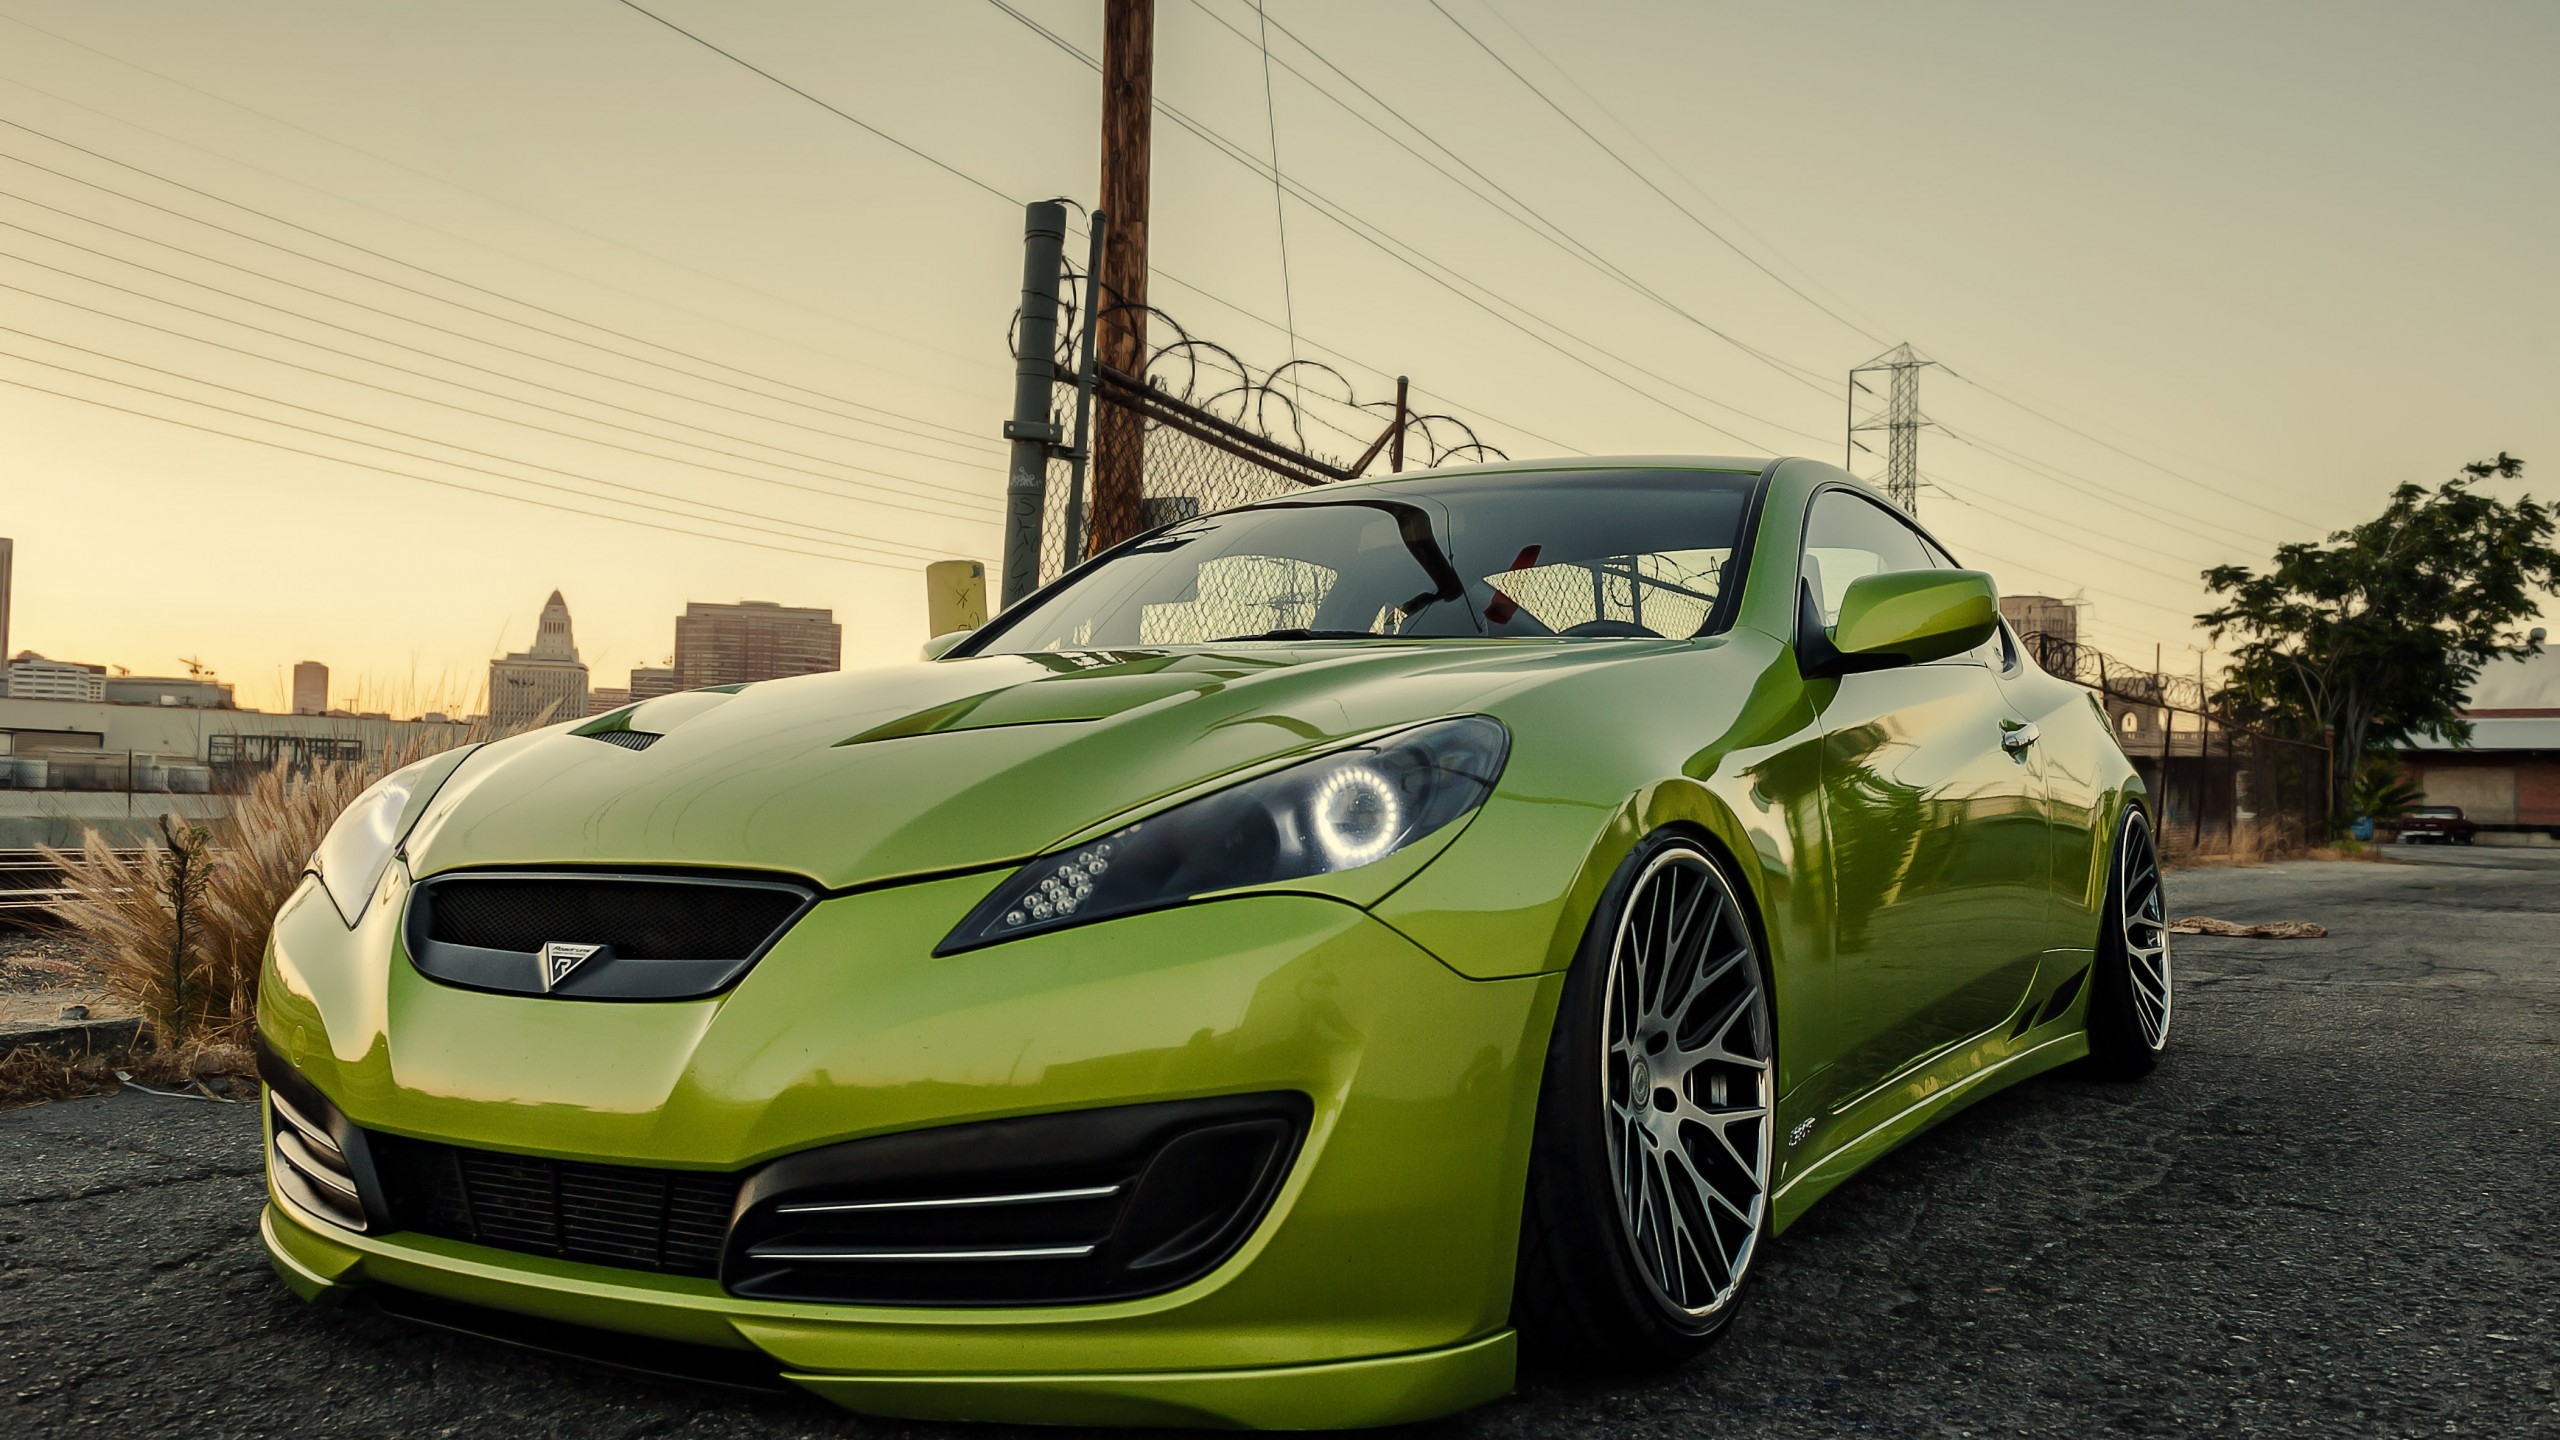 Stanced Hyundai Genesis Coupe for 2560x1440 HDTV resolution